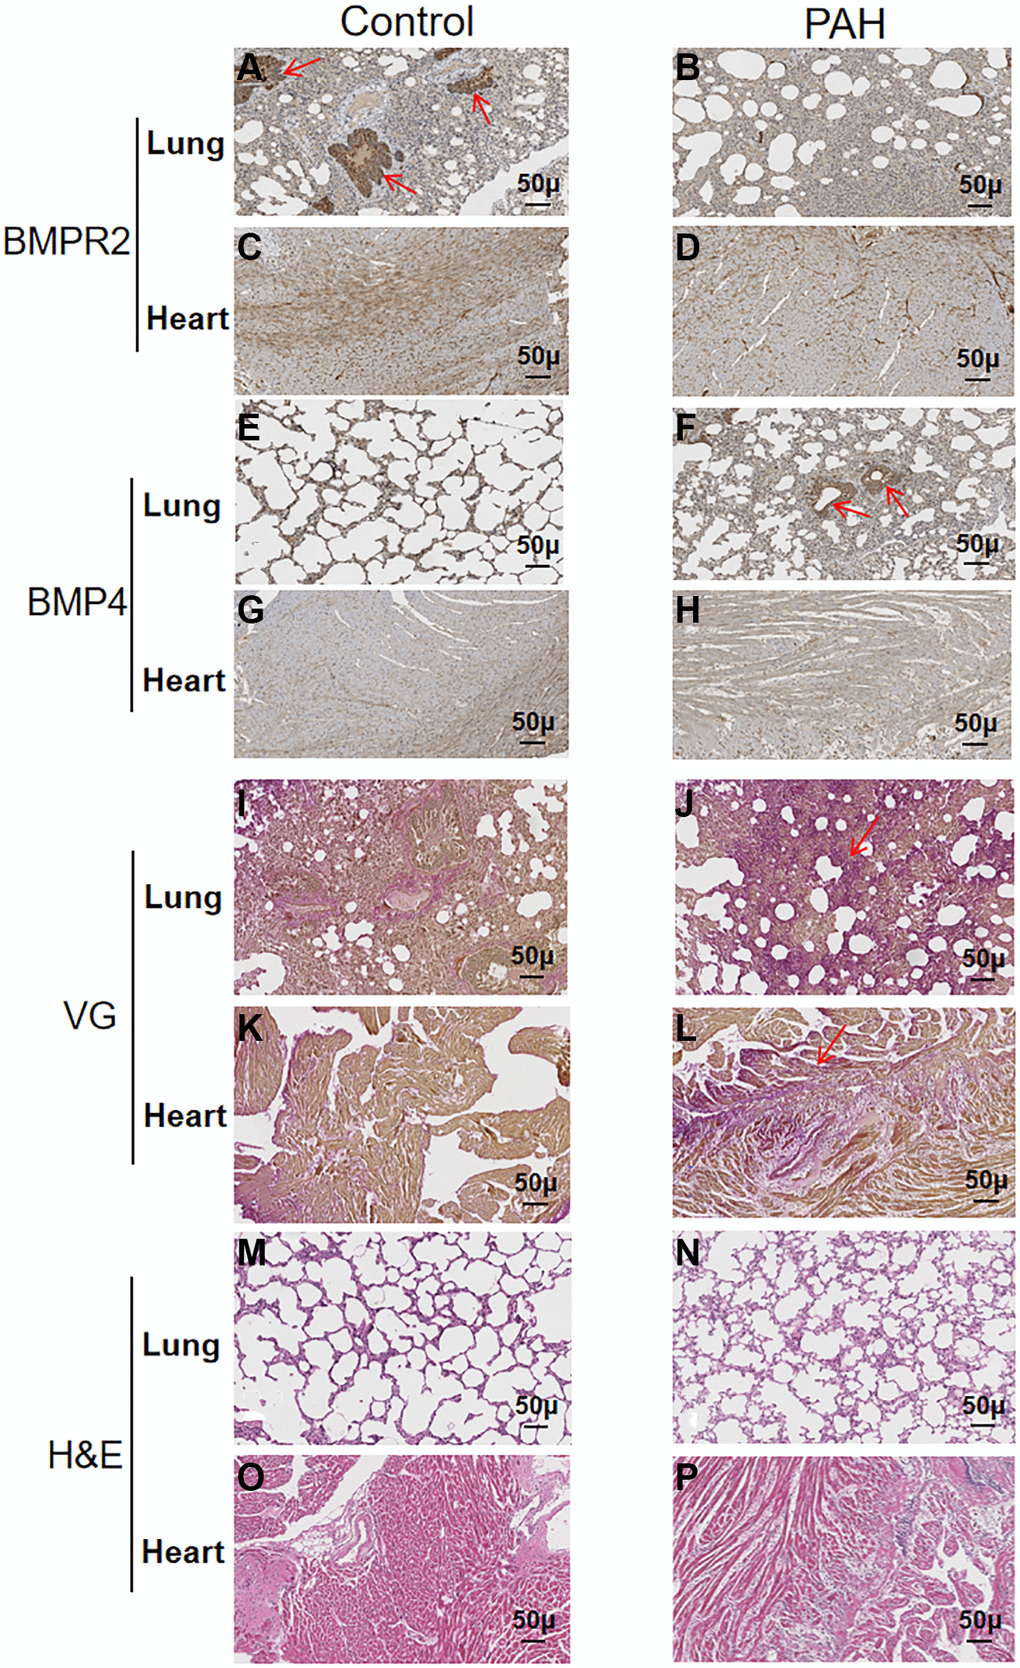 Reduced BMPR2 expression and higher fibrosis were observed in a pulmonary artery hypertension (PAH) mouse model. Abdominal shunt was used to create a pulmonary artery hypertension (PAH) mouse model. The lung and heart sections of 4 PAH mice were compared with those of 4 control mice. Scale bars, 50 μm. (A–D) BMPR2 expression was reduced on the lung section of the pulmonary hypertension model mice compared with that of the control mice based on immunohistochemistry staining. The brown stained areas indicated by the arrows in Figure 5A showed high BMPR2 protein levels in the lung section of the control mice. This reduction of BMPR2 was not observed in the heart sections comparing PAH mice with the control mice. (E–H) Higher BMP4 expression was observed on the lung section but not on the heart section of the PAH mice compared with the control mice by immunohistochemistry. The brown stained areas indicated by the arrows in Figure 5F showed high BMP4 protein levels on the lung section of the PAH mice. (I–L) Fibrosis was observed in the PAH mice. Van Gieson staining was carried out for the lung and heart section of the PAH and control mice. The area indicated by the arrow in Figure 5J and Figure 5L showed fibrosis on the lung and heart section of the PAH mice, respectively. (M–P) hematoxylin-eosin staining was carried out for the lung and heart section of the PAH and control mice.